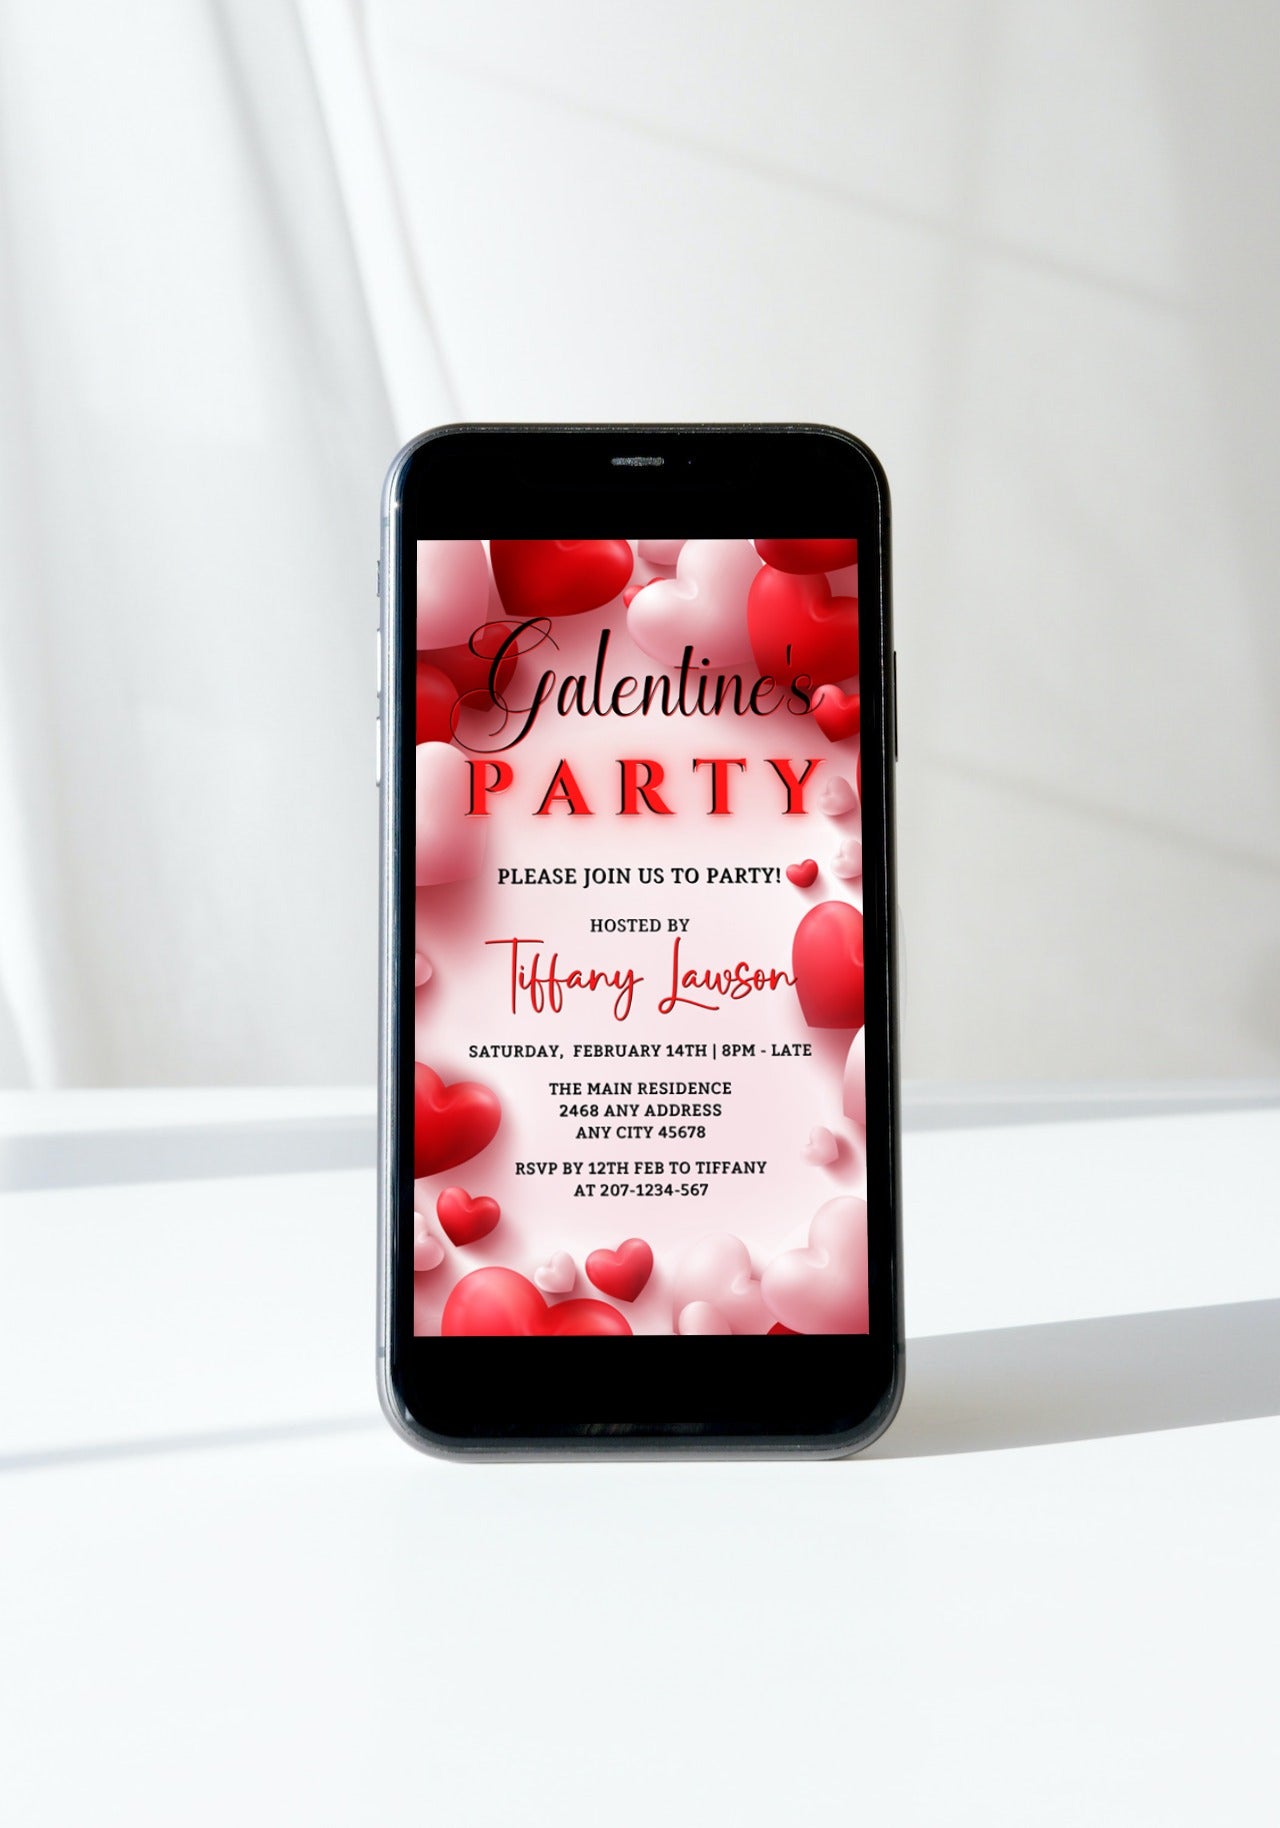 Digital invitation displayed on a smartphone screen, featuring customizable red hearts design for a Galentine's party. Editable via Canva for easy event personalization.